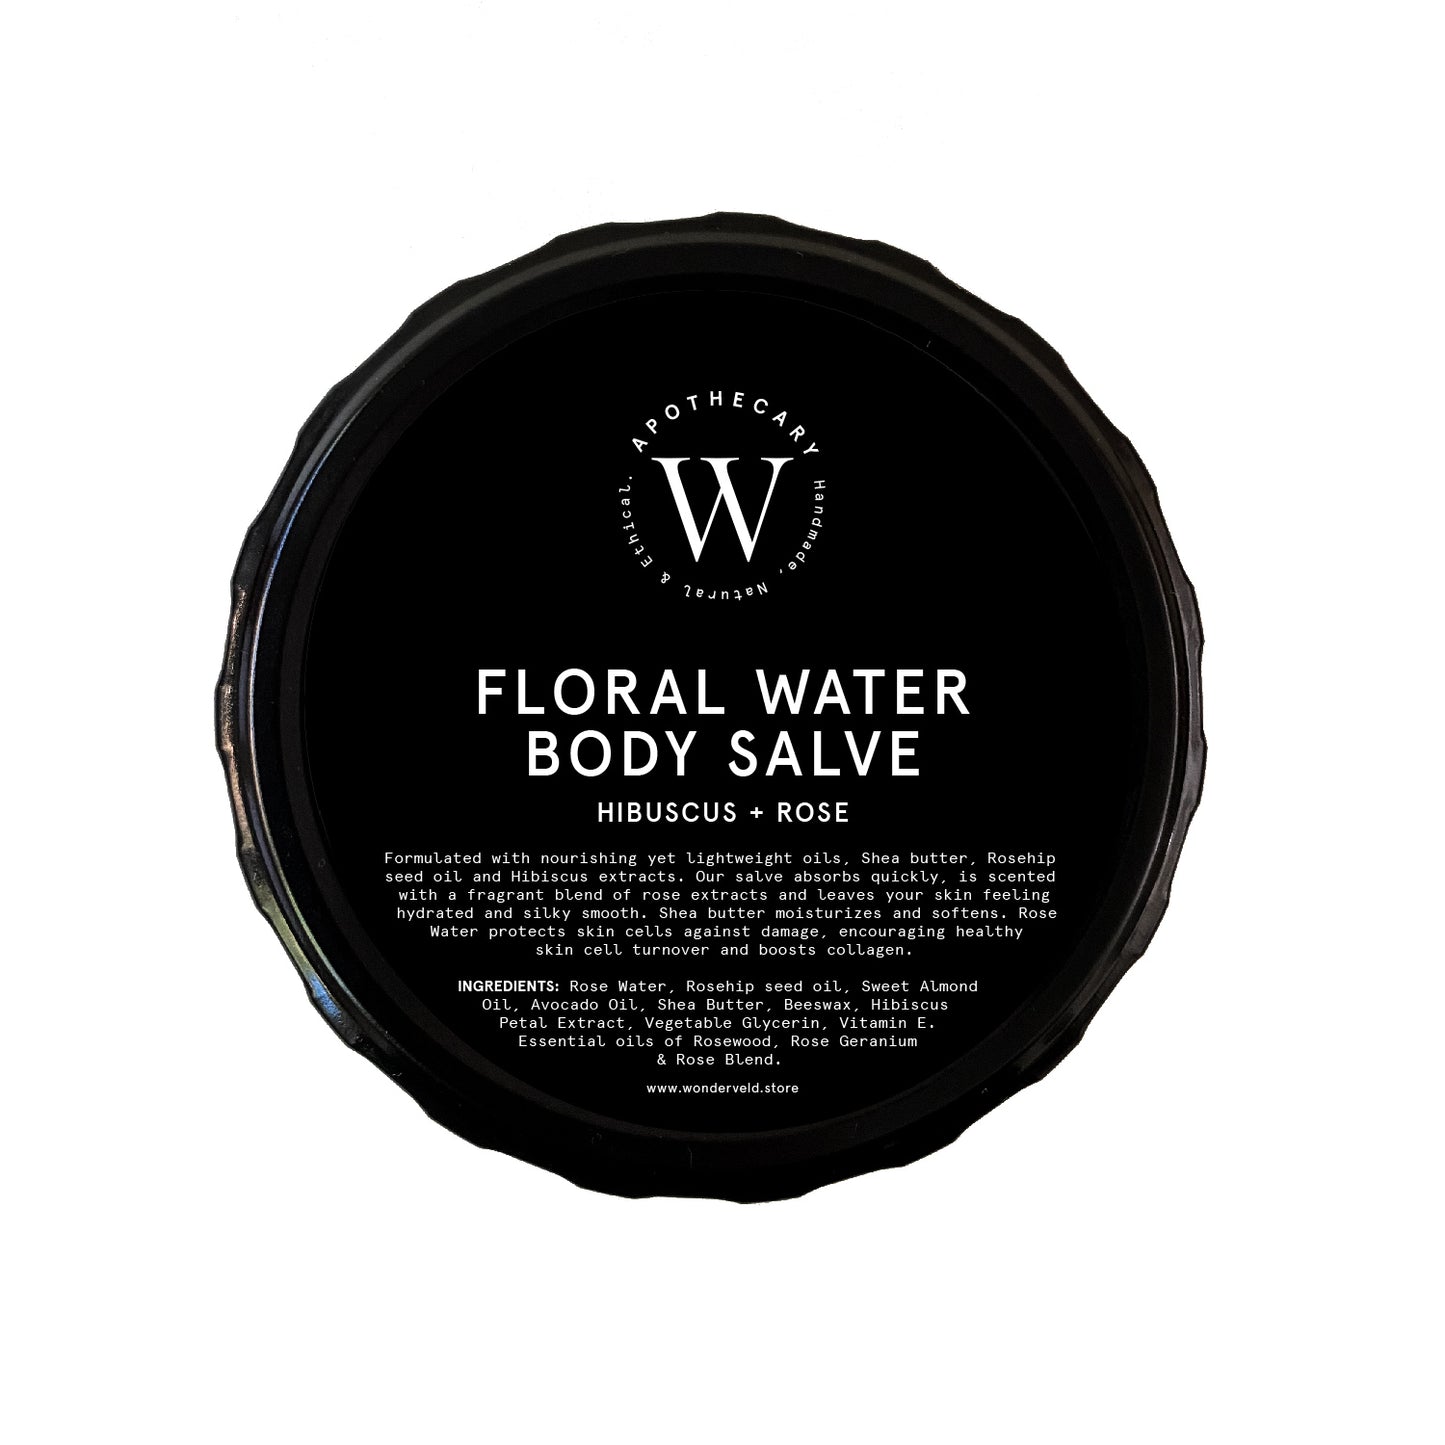 FLORAL  WATER BODY SALVE - Hibiscus + Rose